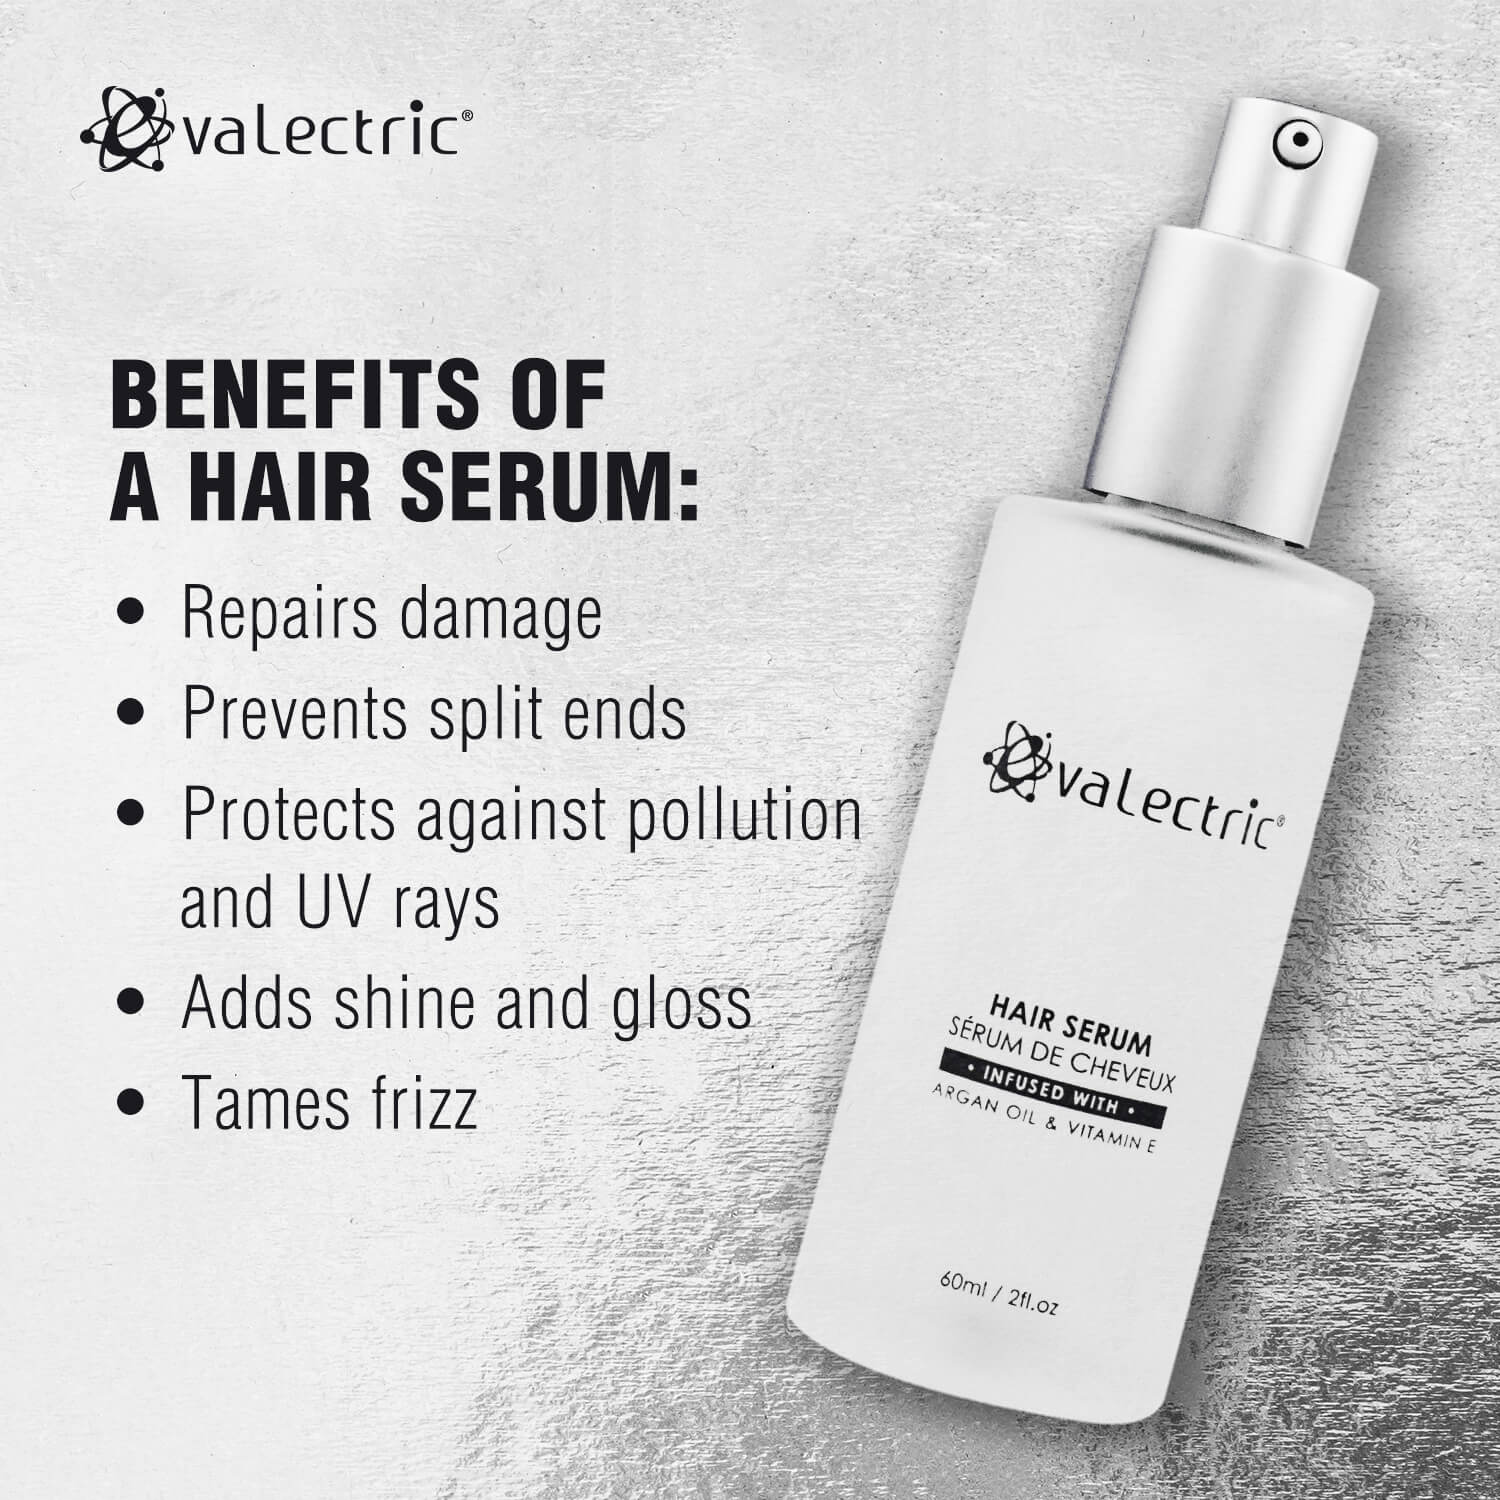 Evalectric 7 Reasons to Use the Evalectric Hair Serum Infographic